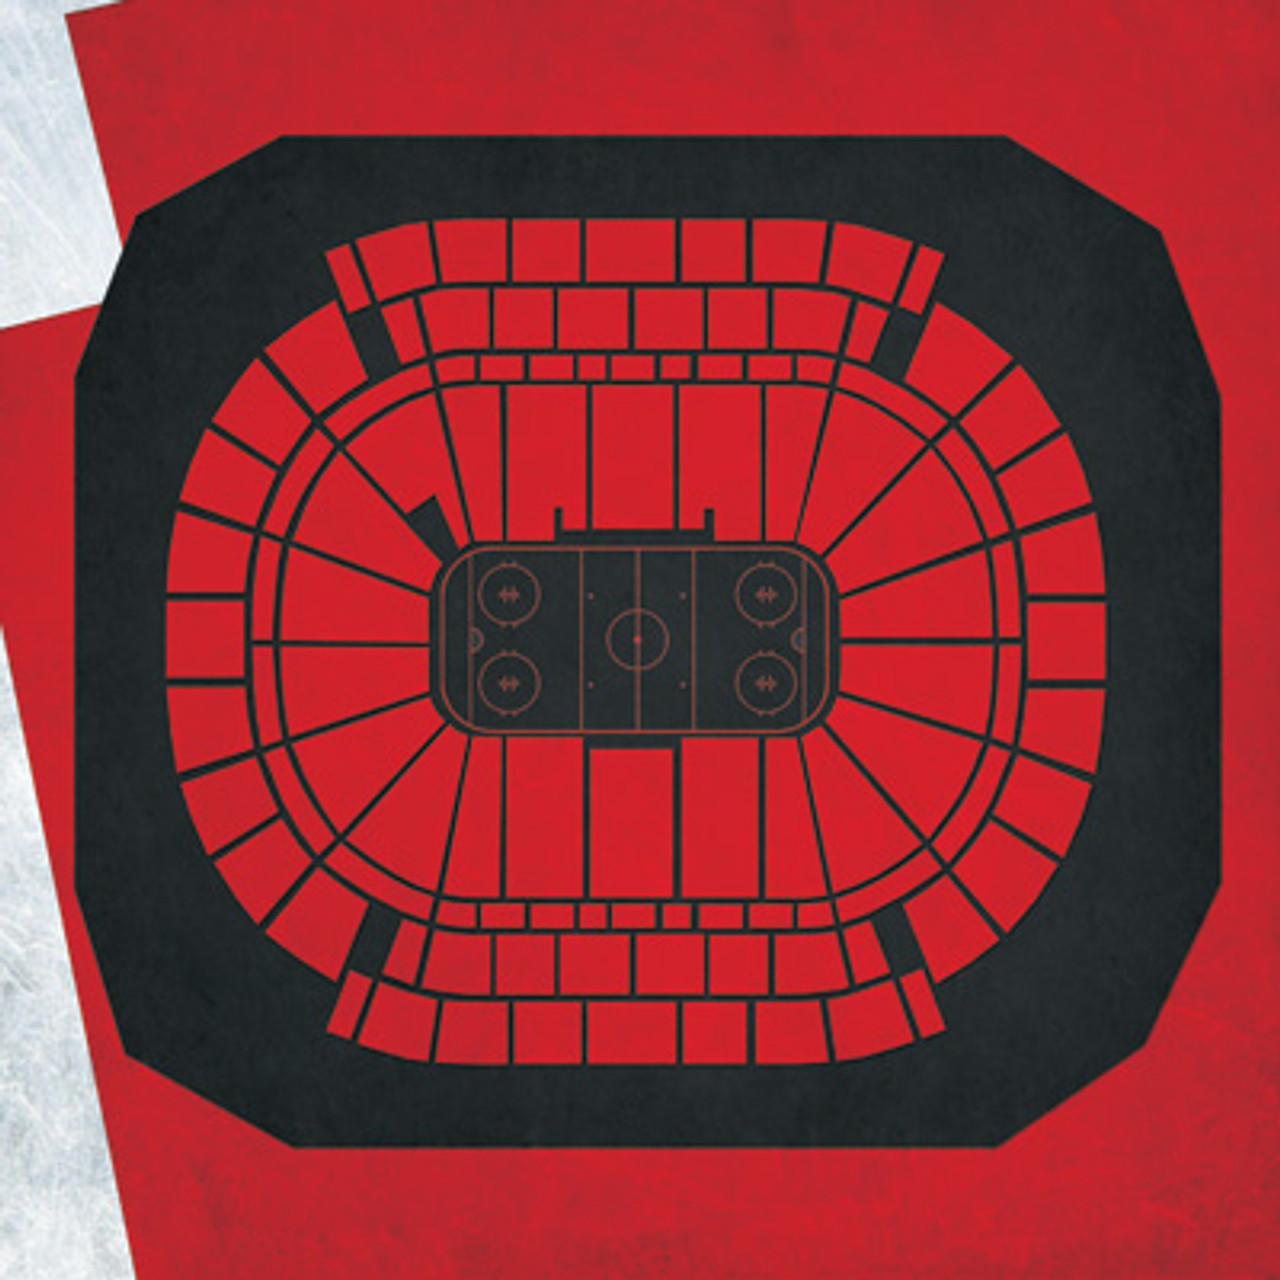 New Jersey Devils - Prudential Center City Print